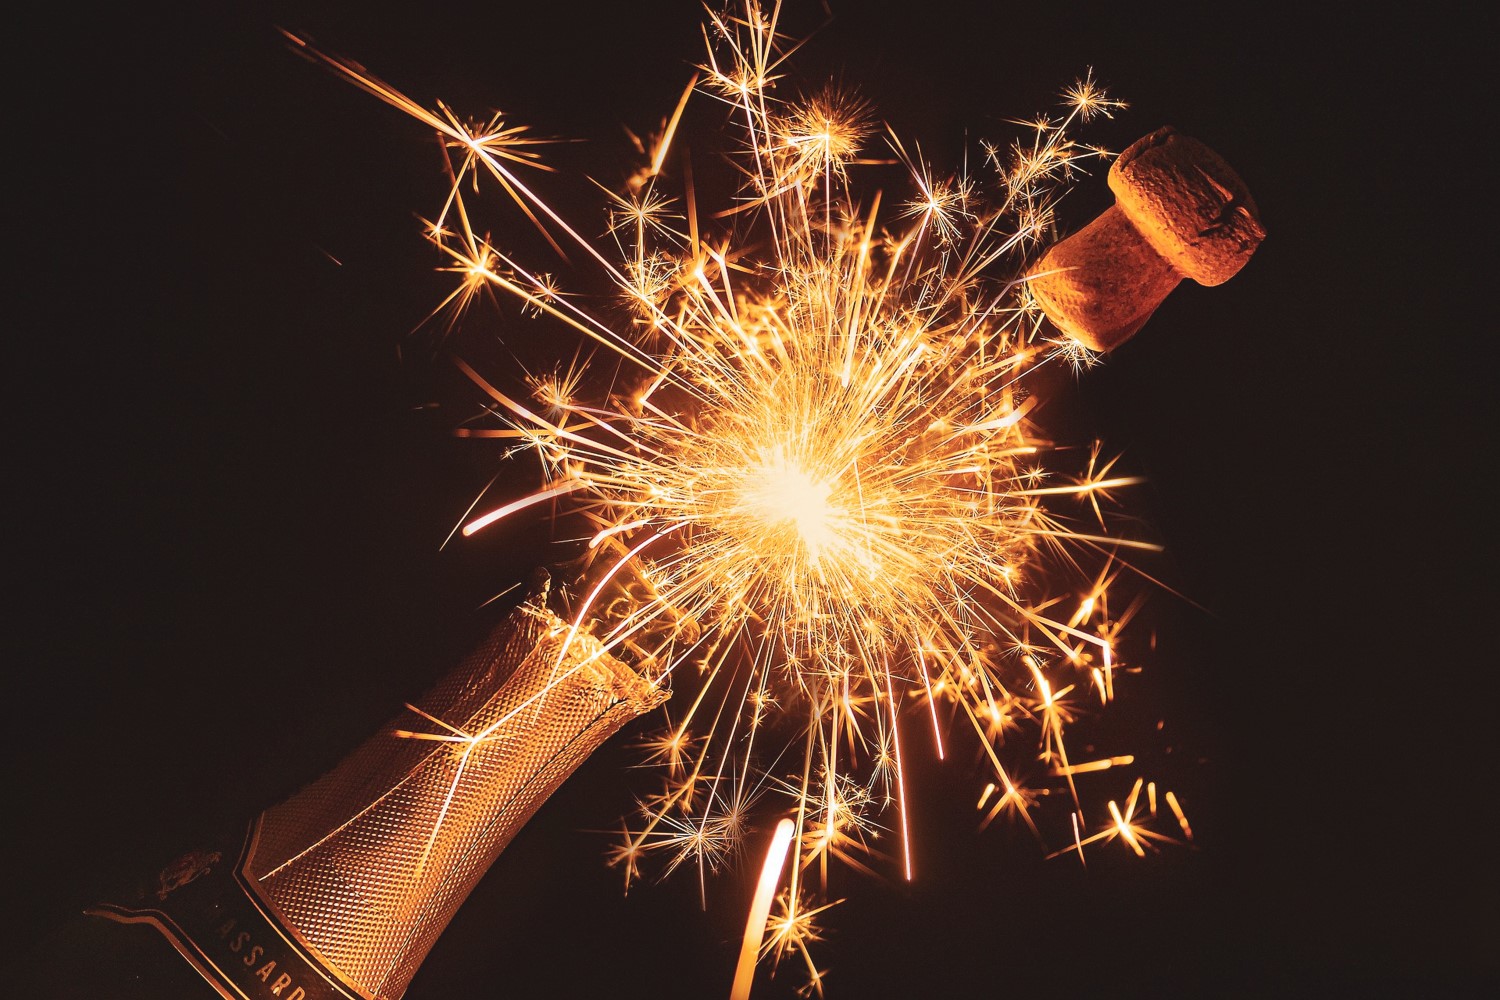 Celebrate the New Year in the Poconos!